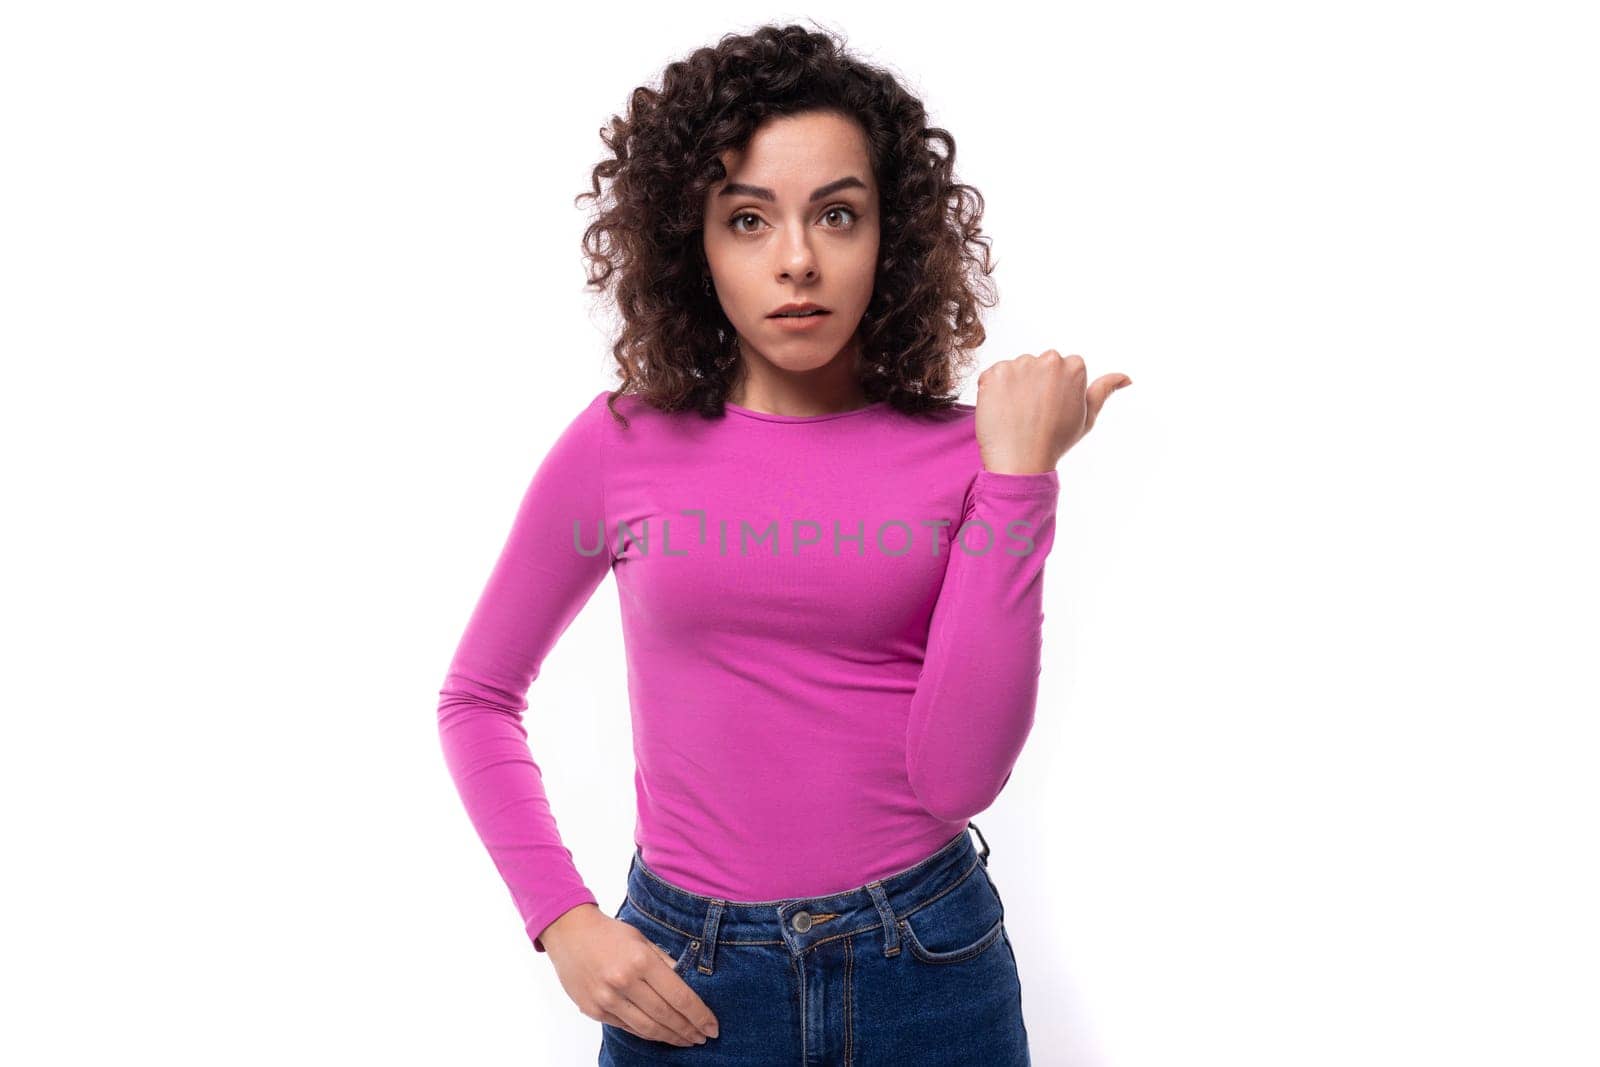 young woman working in advertising dressed in a lilac turtleneck on a white background with copy space by TRMK